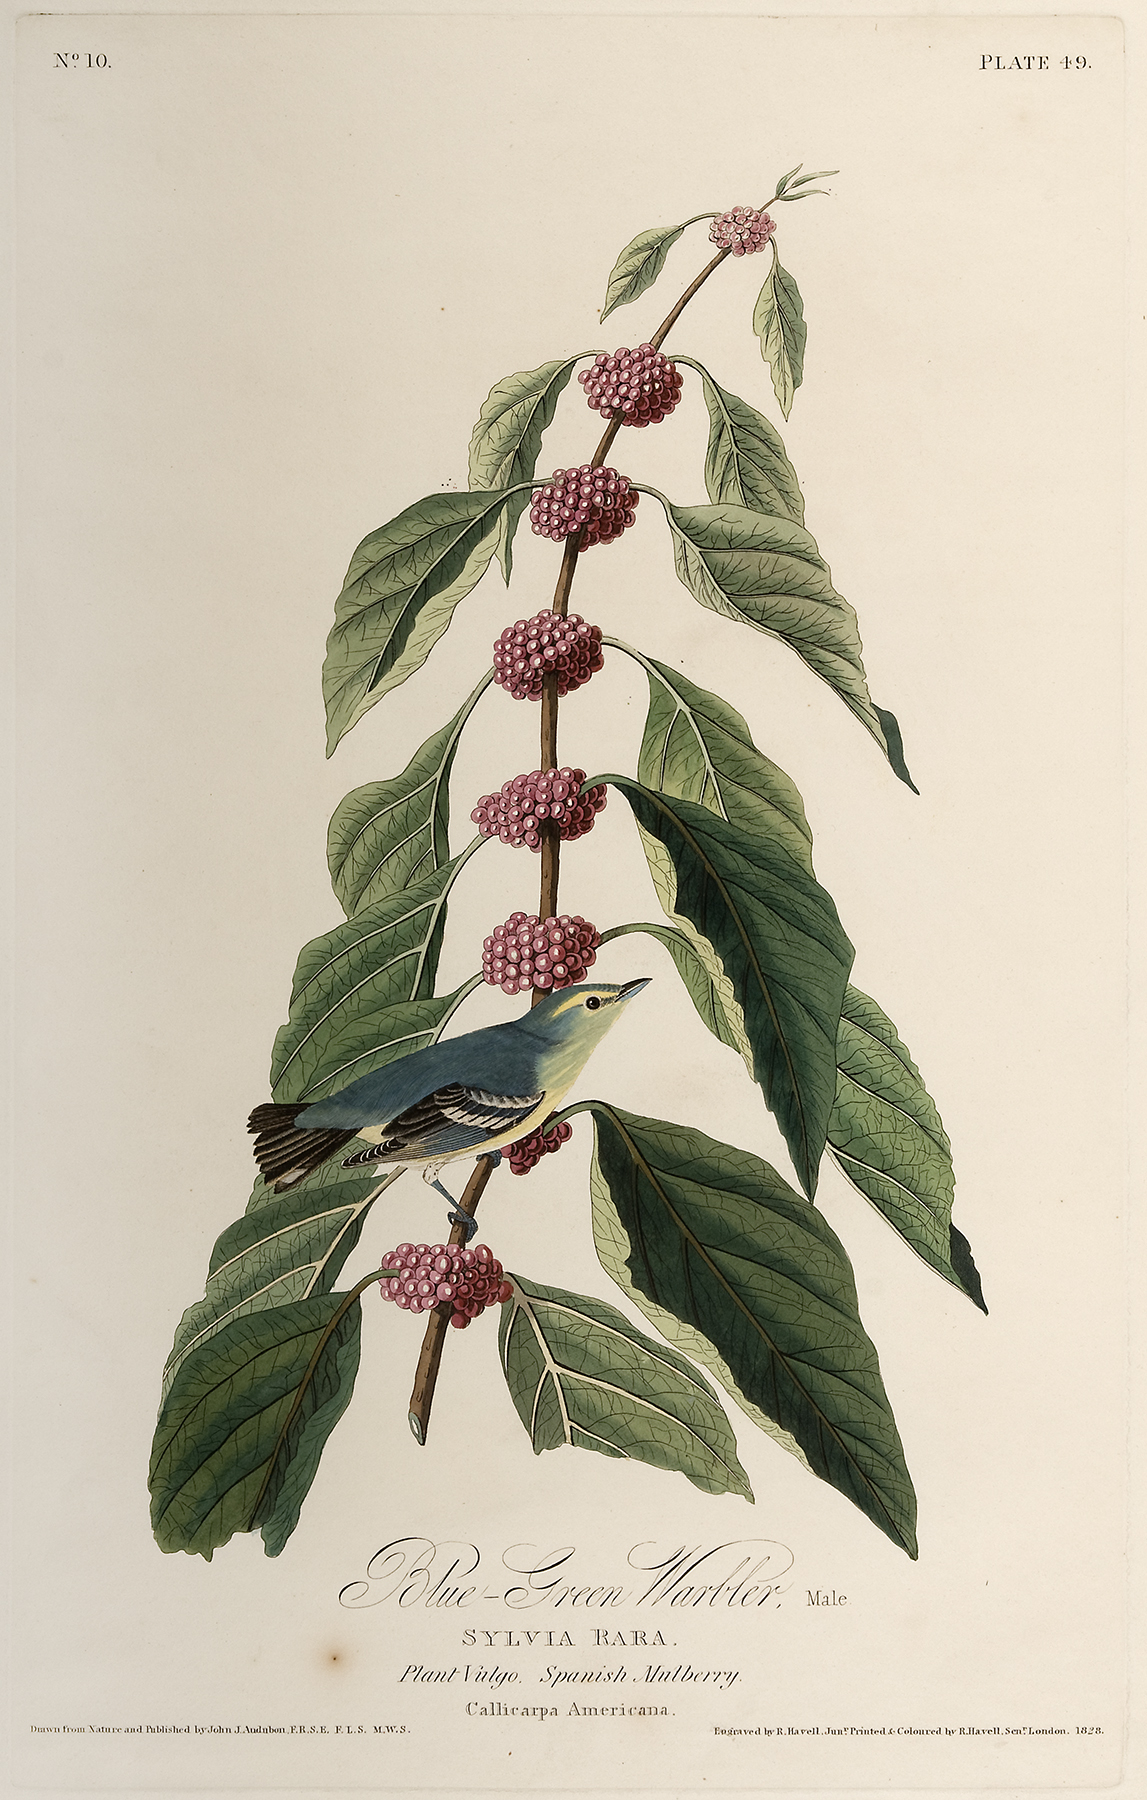 A white-bellied bird with blue body rests on a thin branch of pink berries climbing vertically.